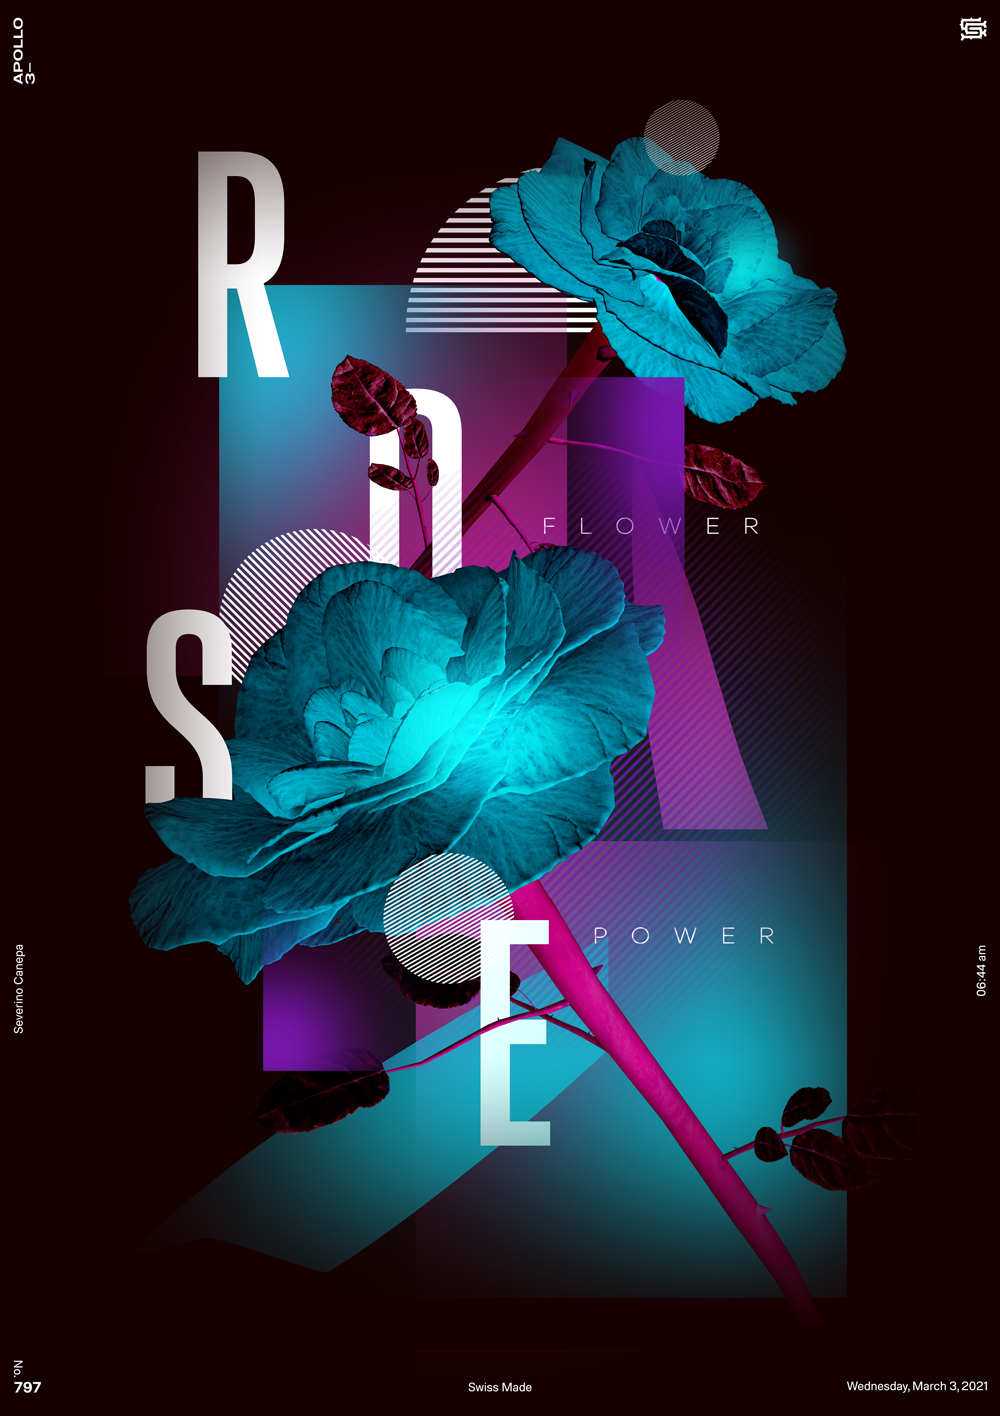 I mix half cut gradient, 3D flowers, and typography to compose a fluid design